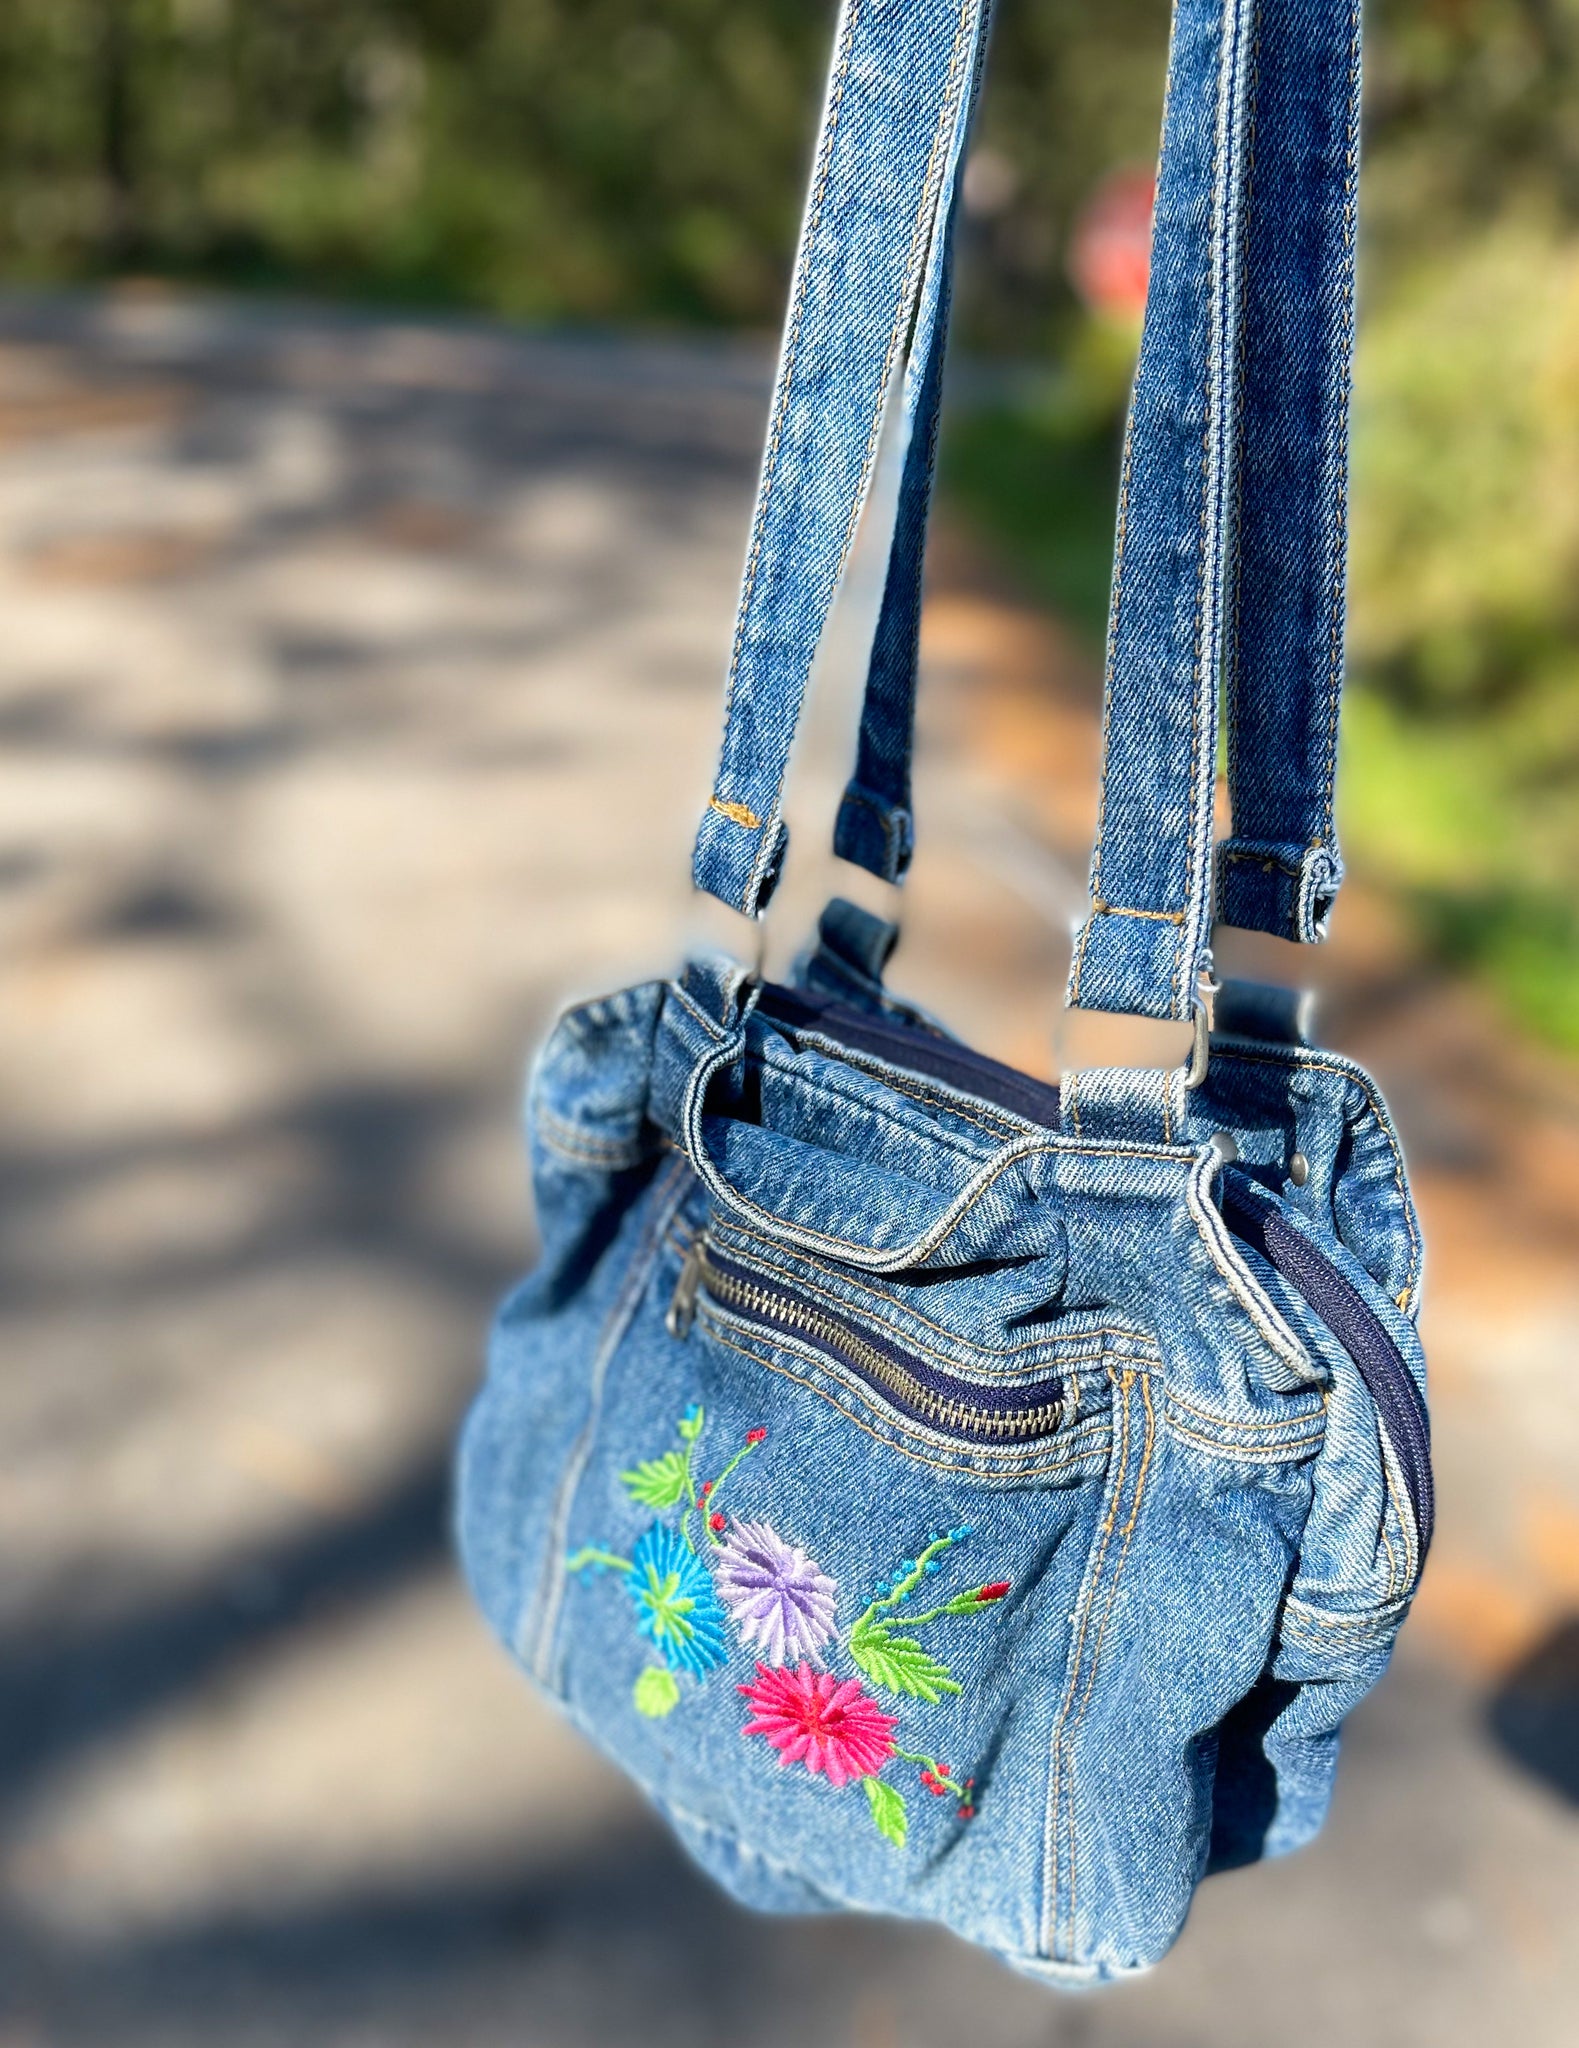 Jean Blue Boho Bag With Applique a Rose Denim Patchwork - Etsy | Blue jeans  crafts, Recycled denim, Upcycle jeans